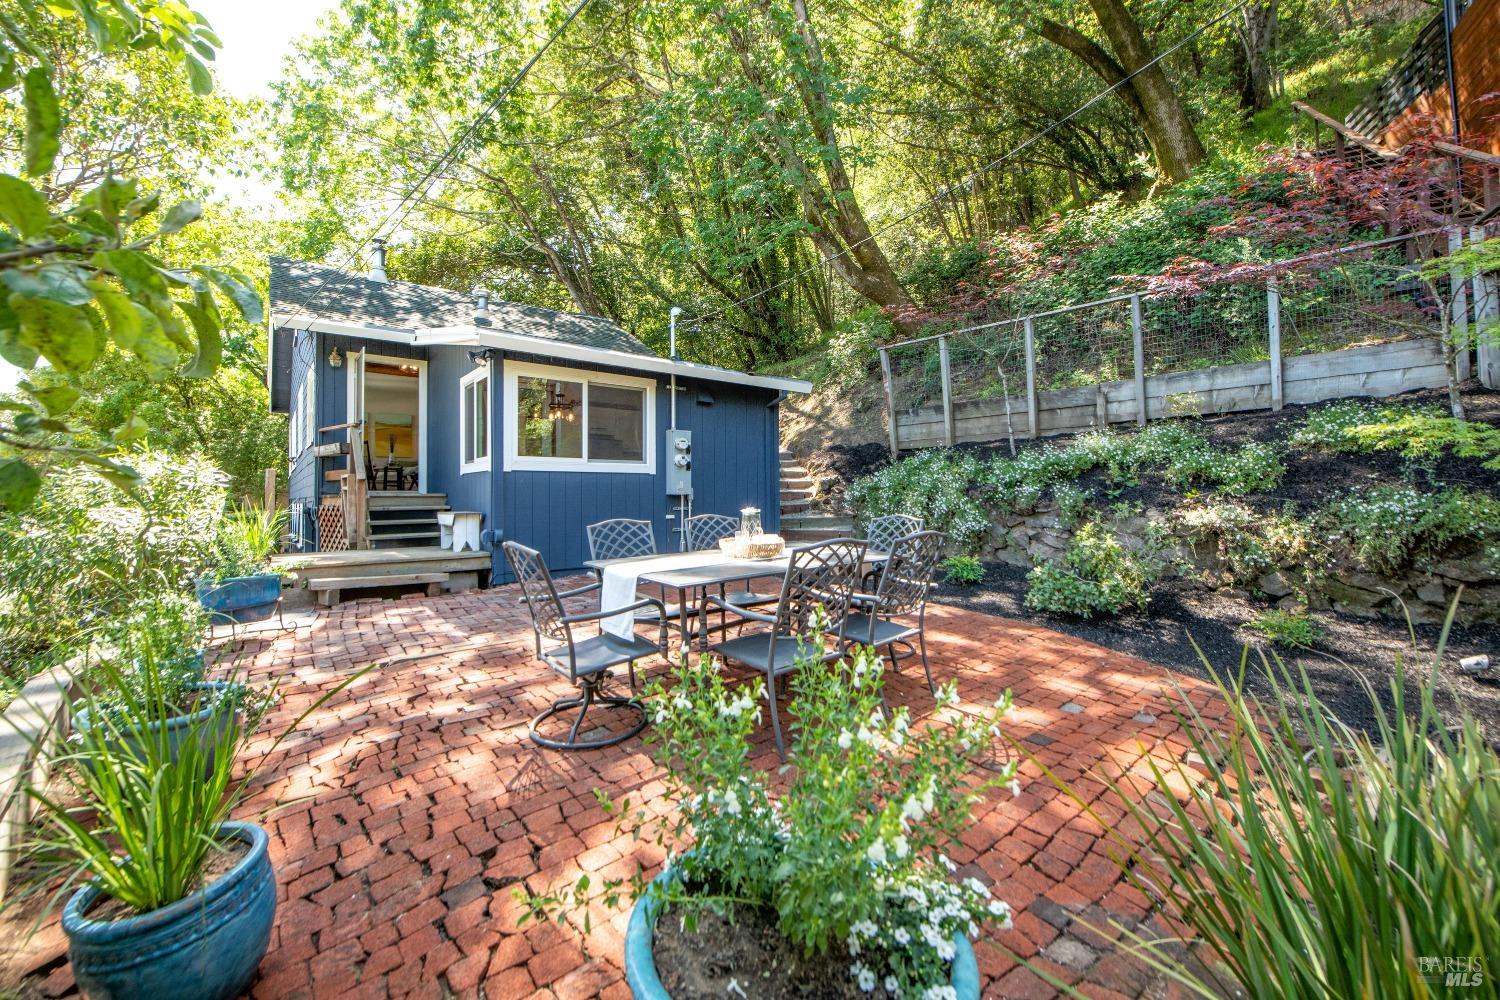 Photo of 251 W End Ave in San Rafael, CA